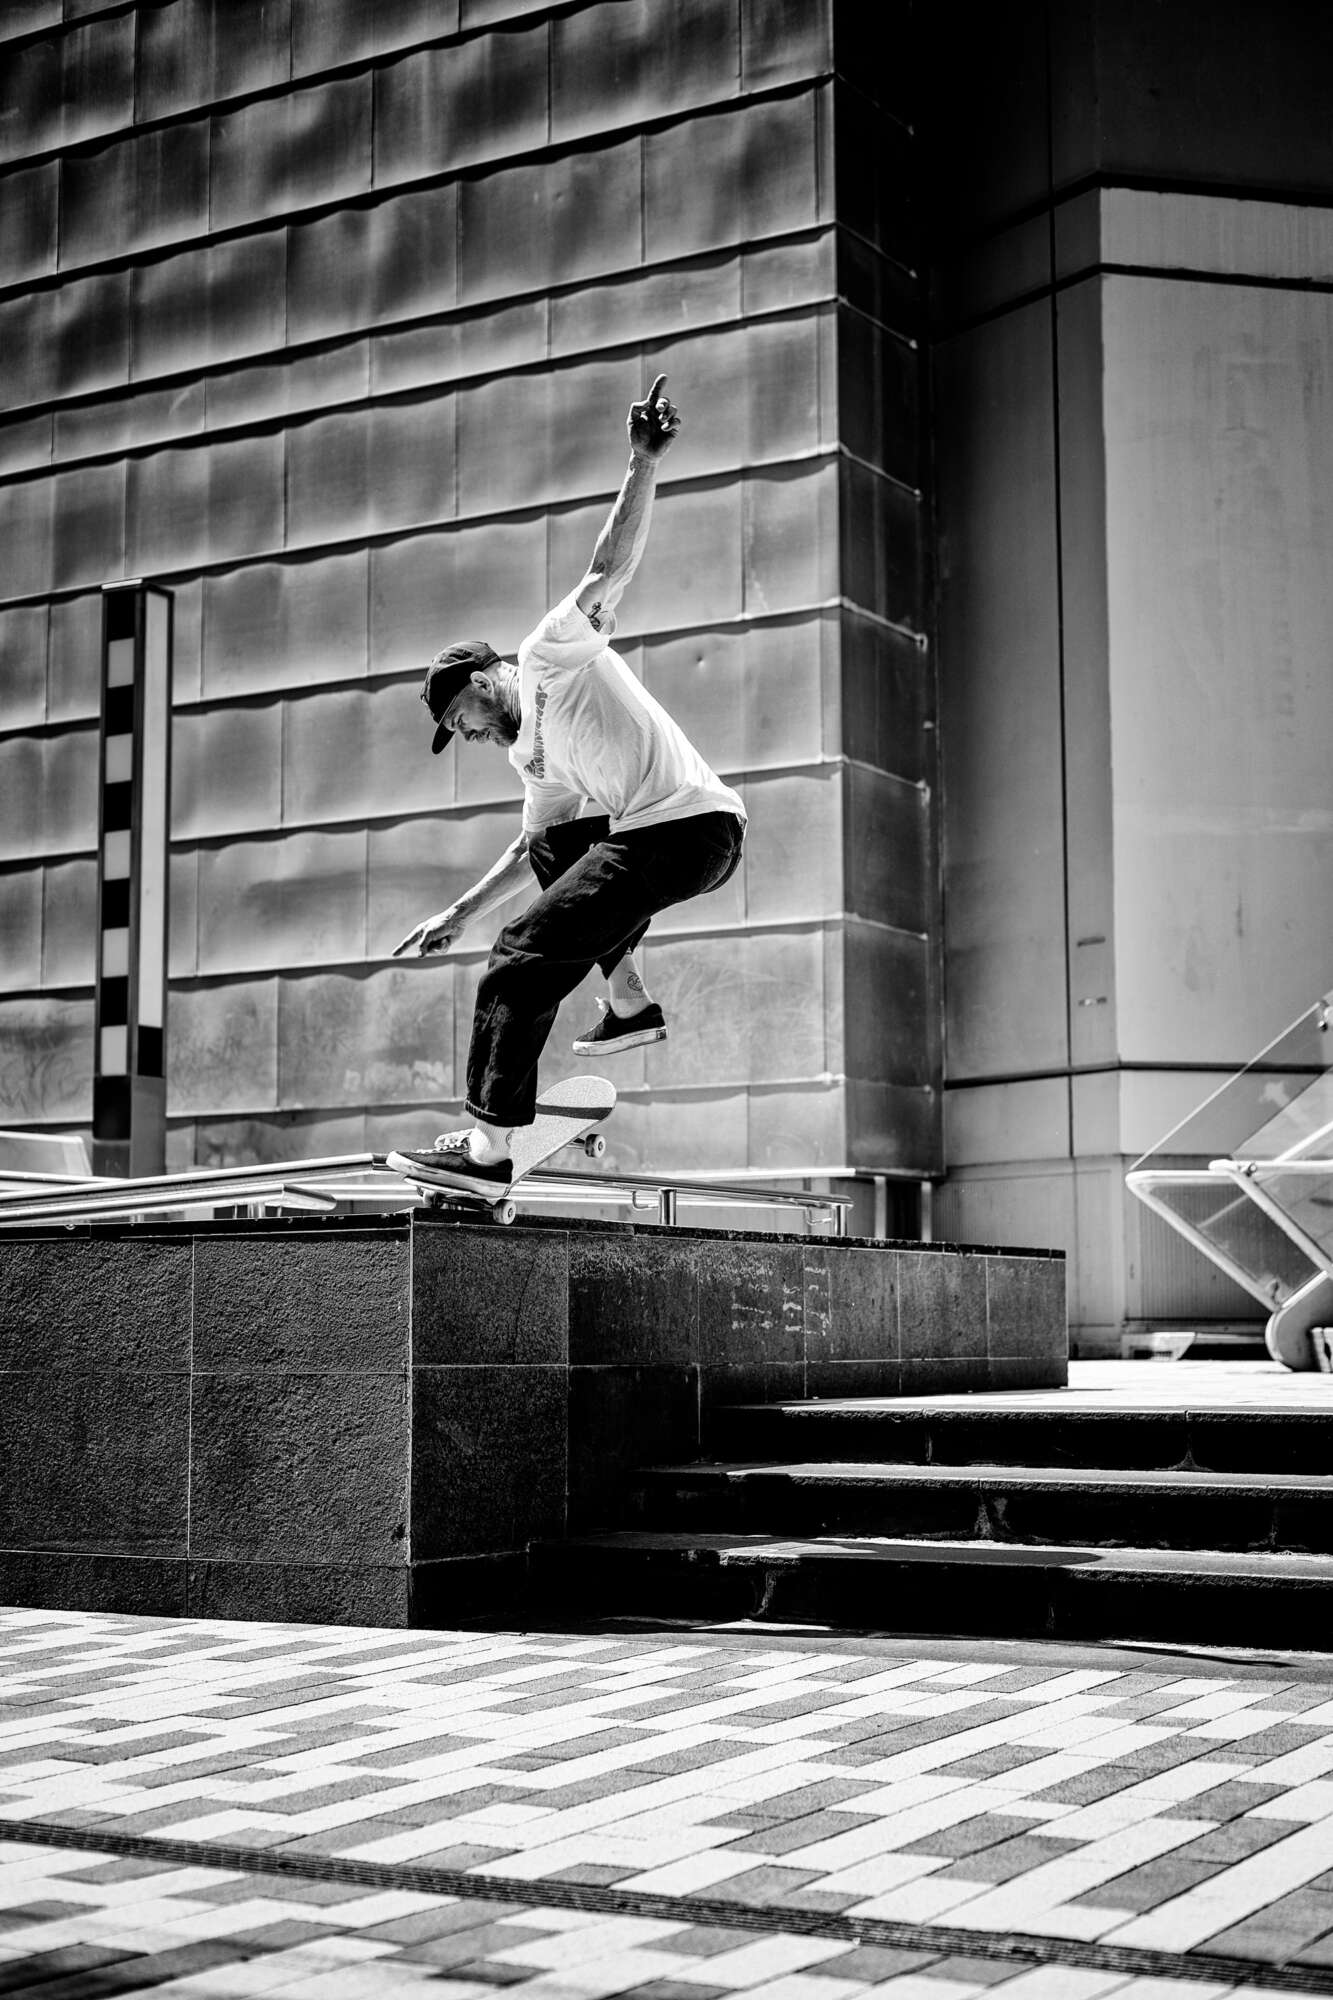 Beacho, pop-shuvit nosegrind, Aotea Square, Auckland. Photo by Kingsley Attwood.